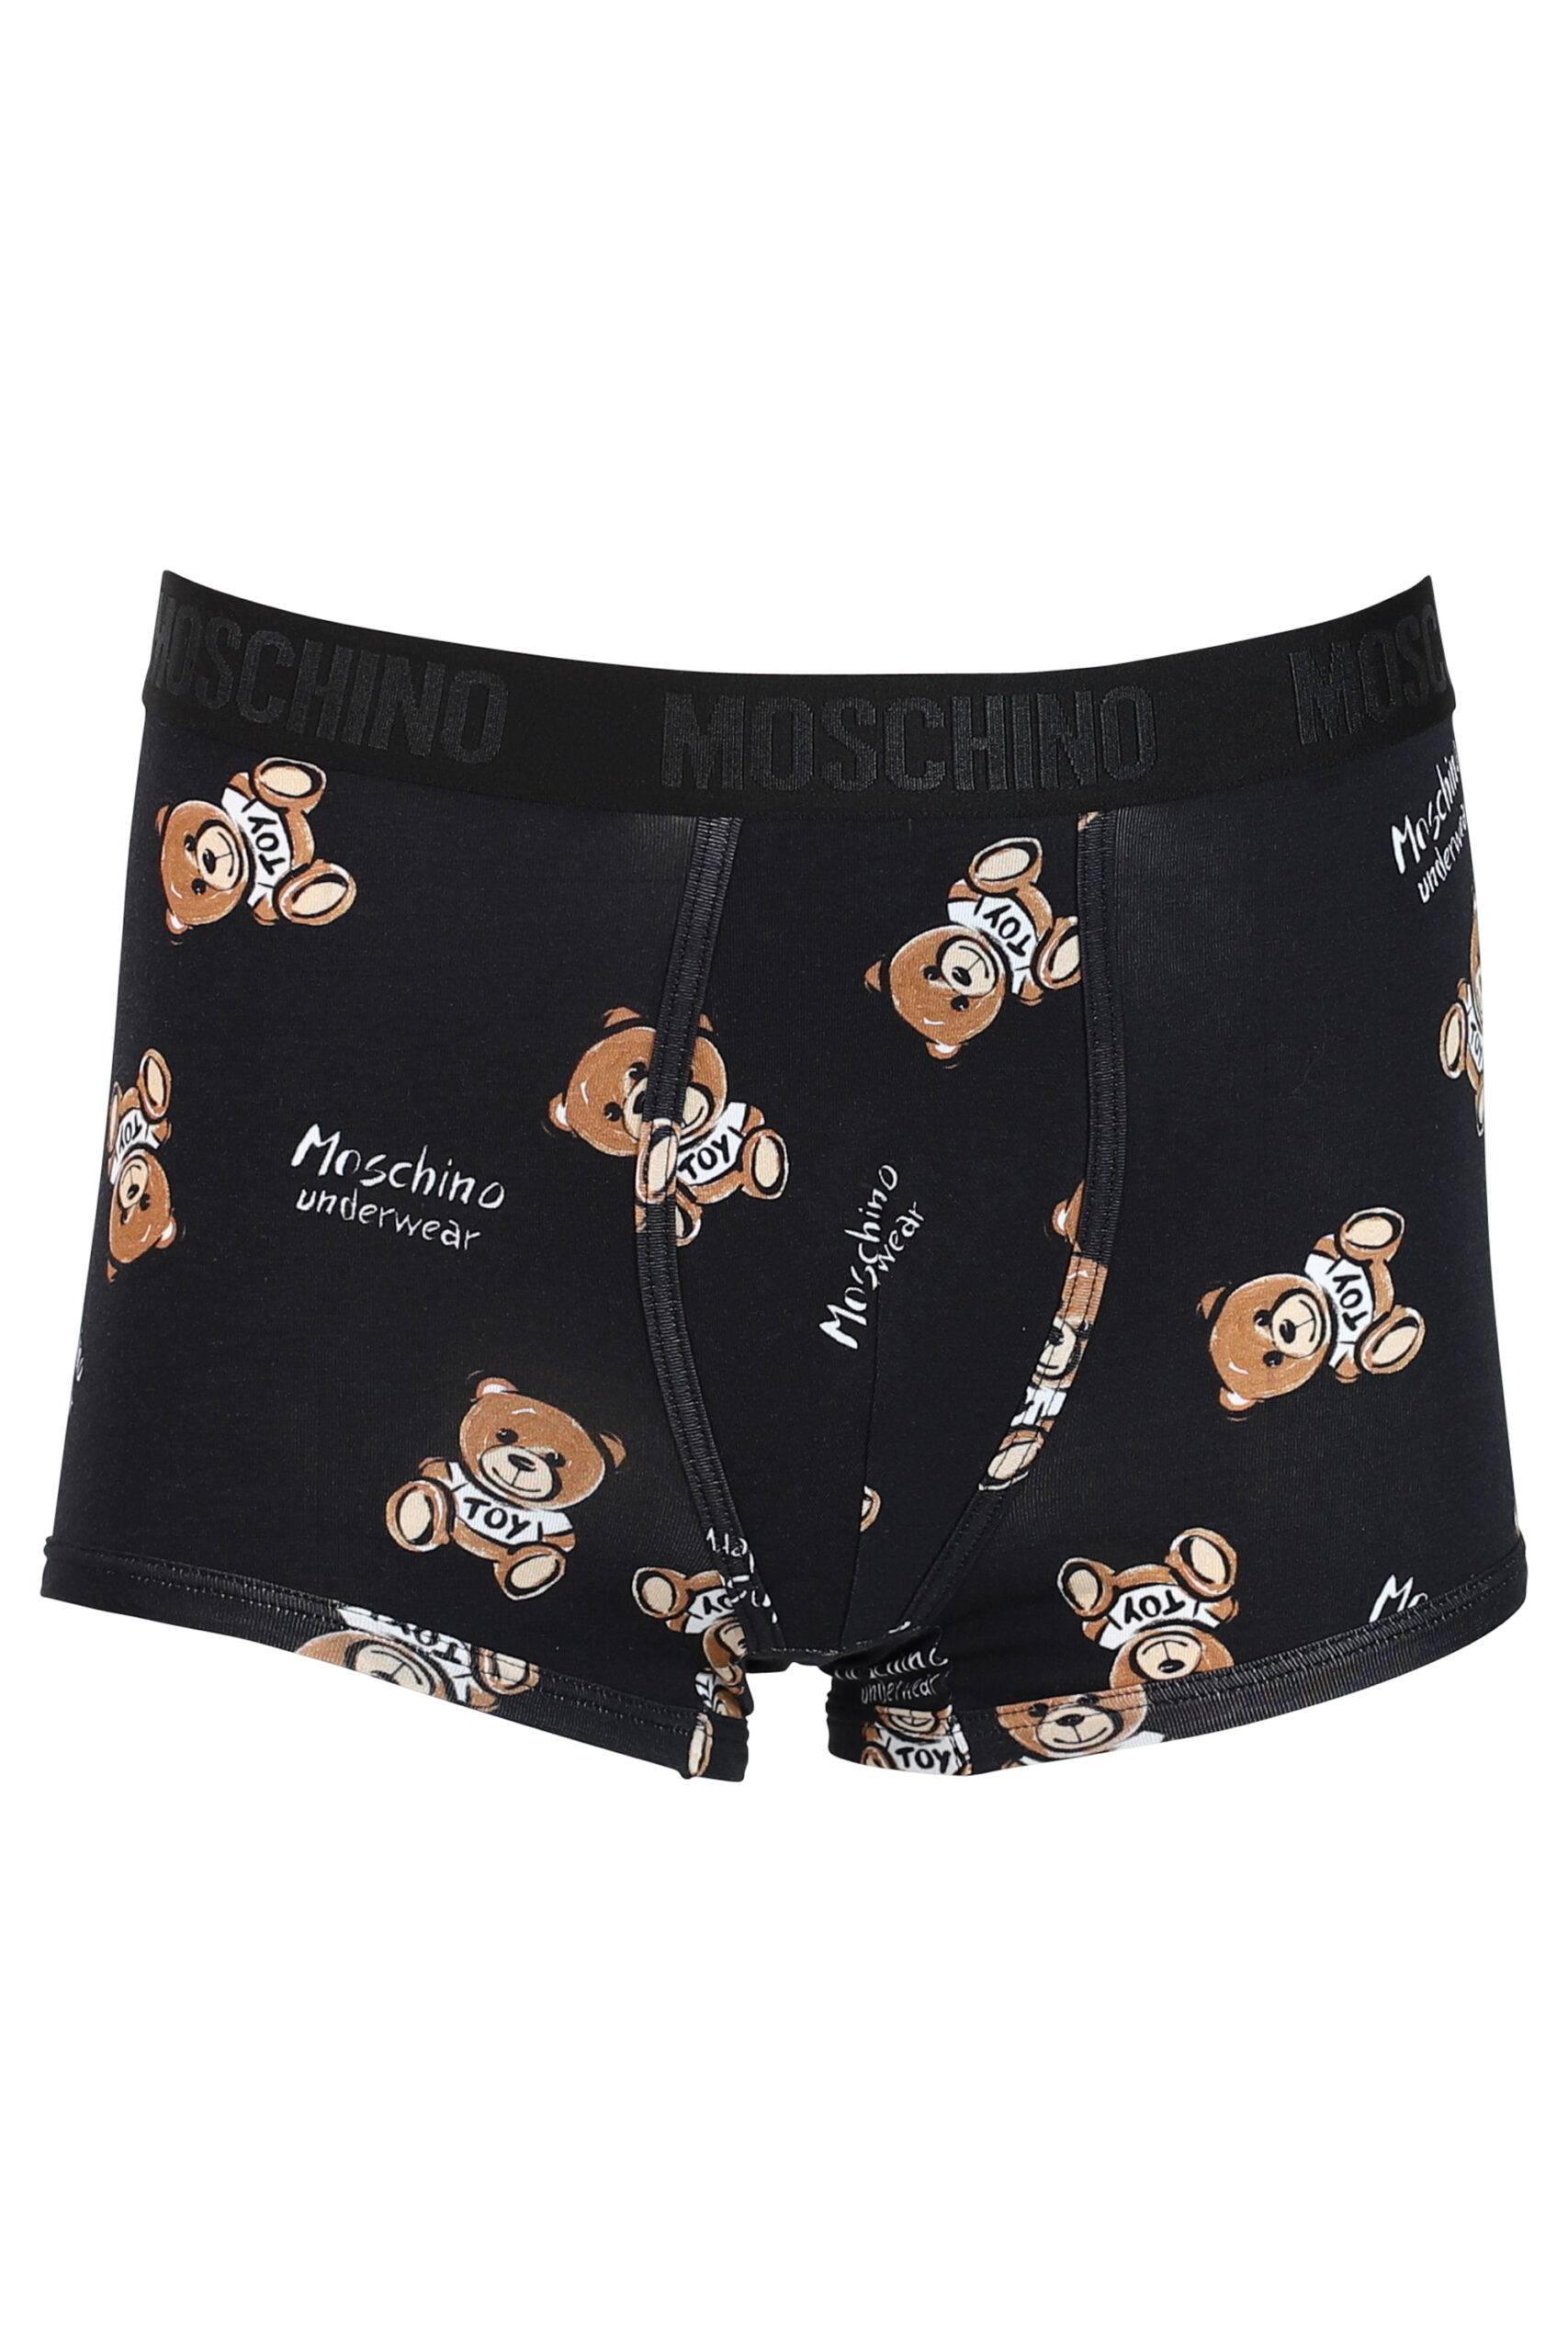 Moschino Pack Of 2 Teddy Logo Boxers - Farfetch